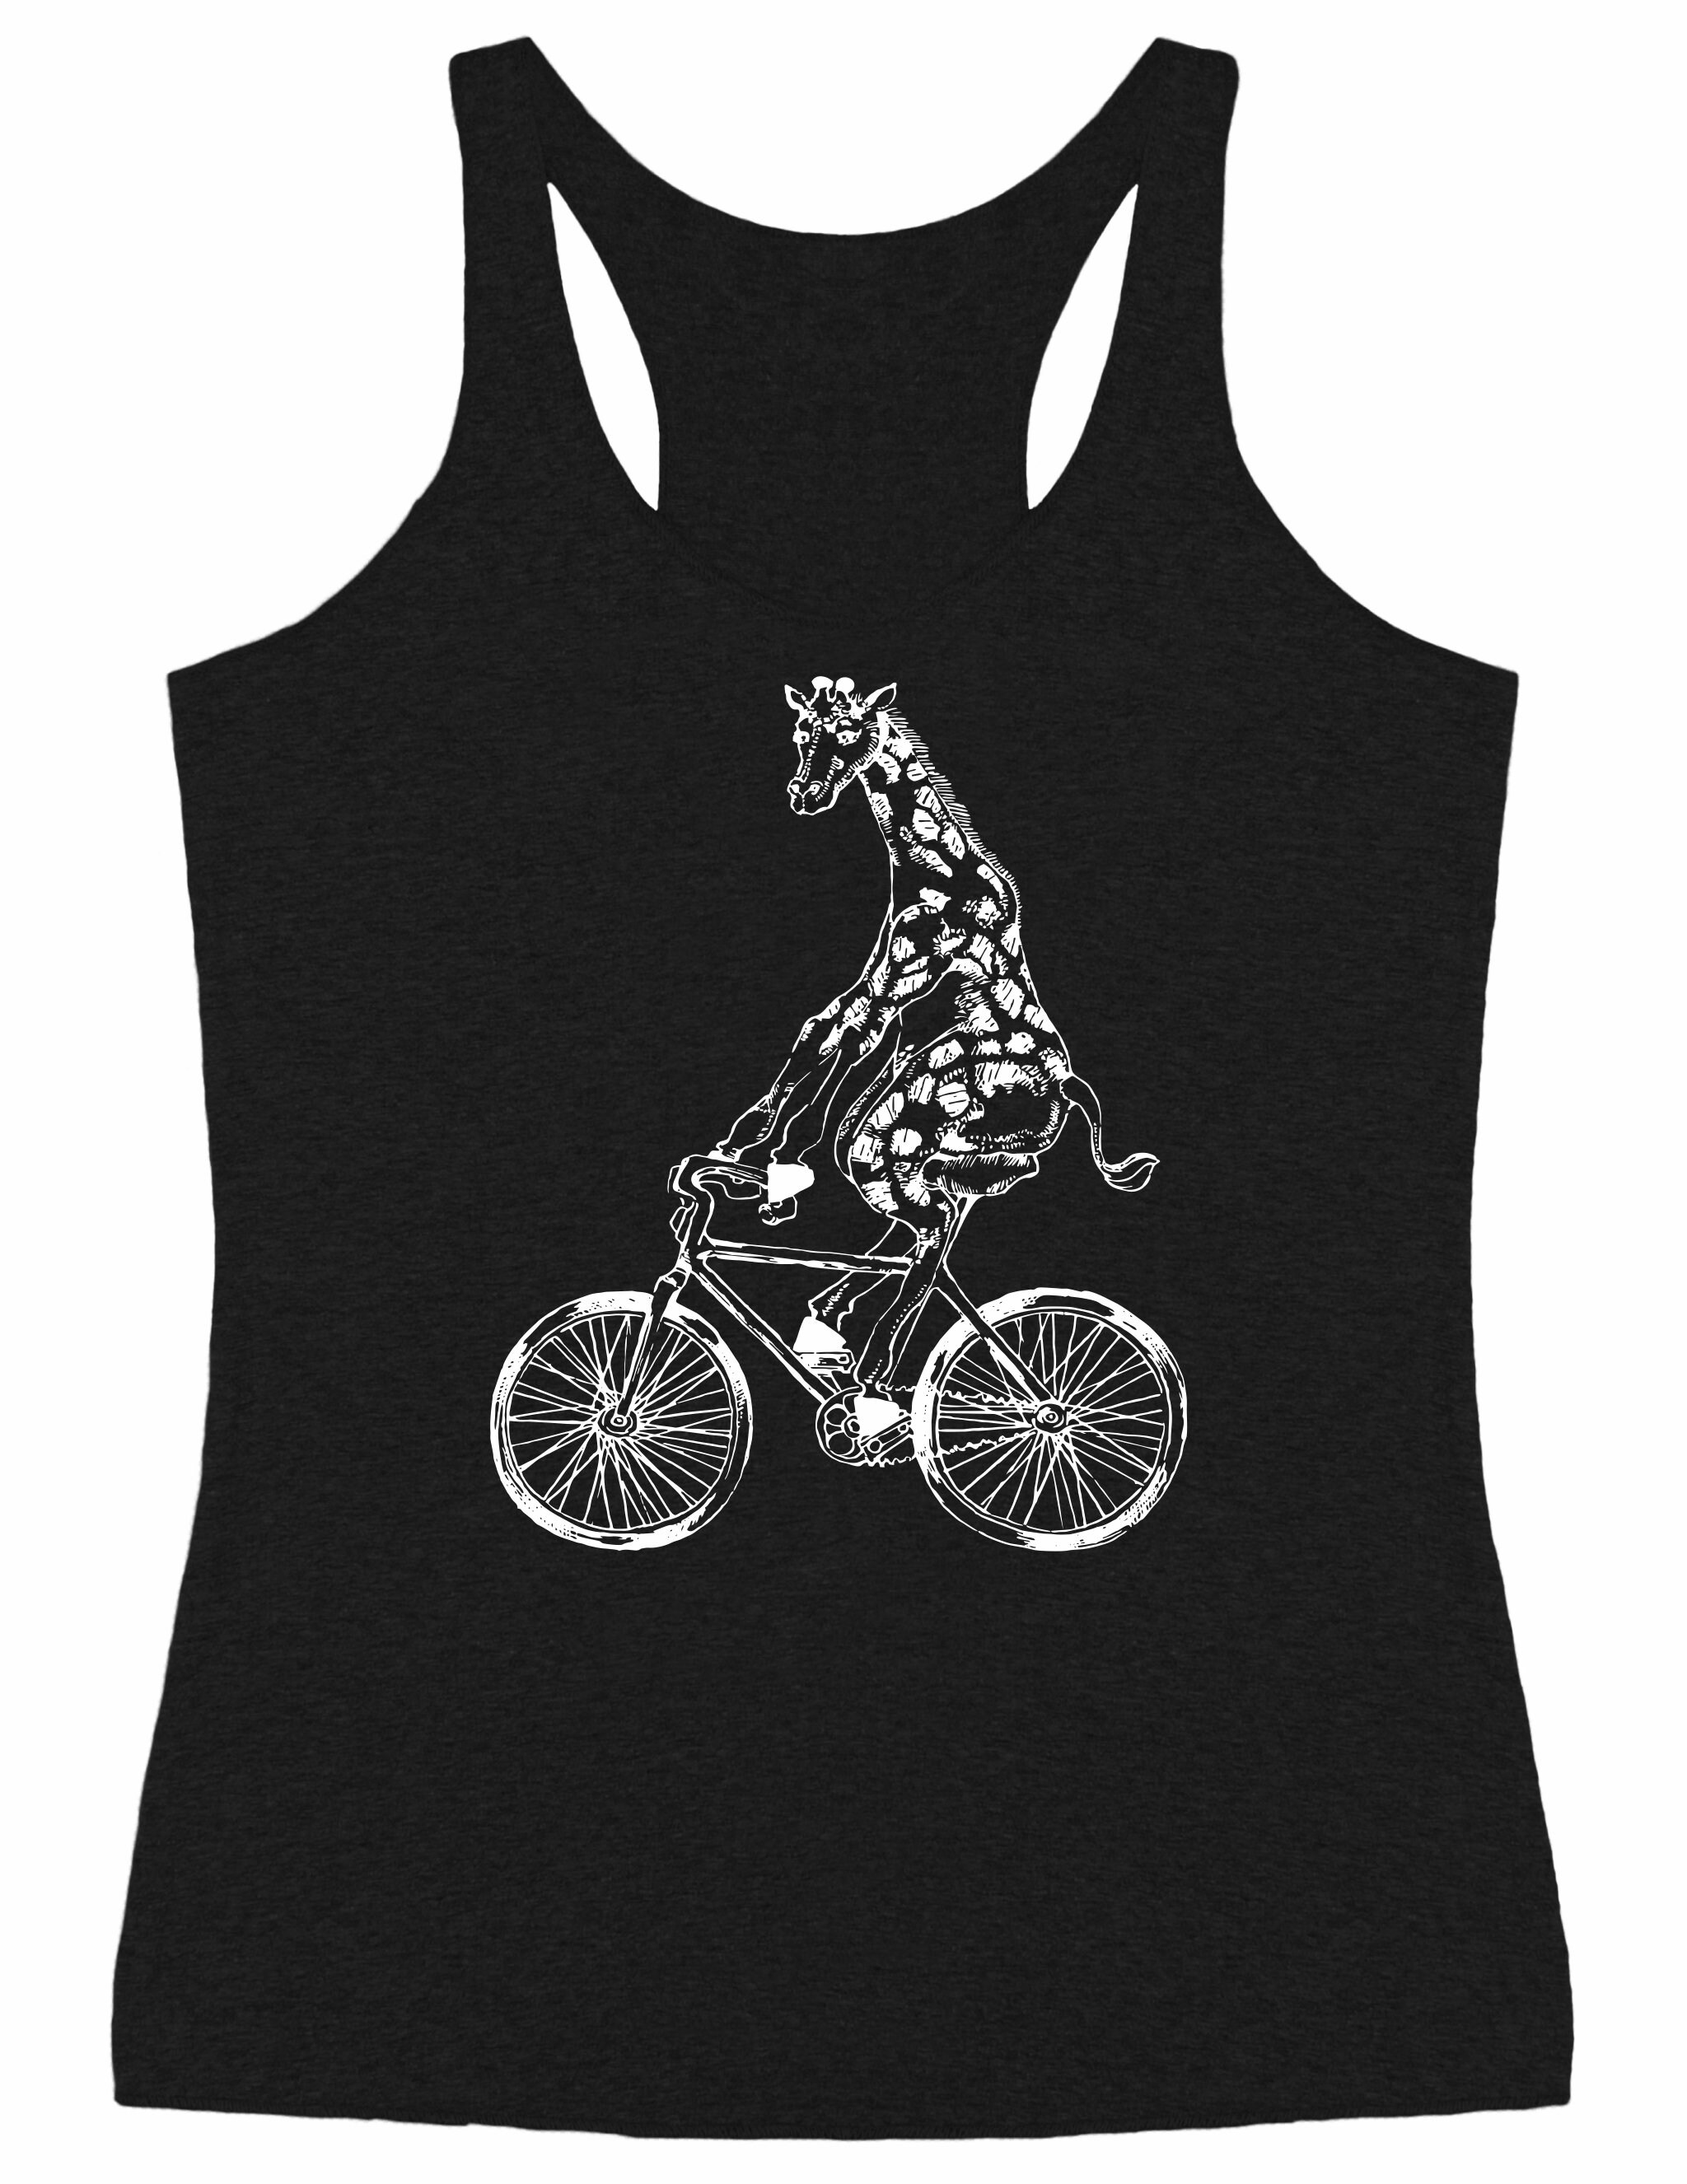 Giraffe On A Bicycle Women's Tri-Blend Tank Top Gift For Her, Cycling Gifts Mom, Girlfriend Birthday, Cyclist Wife Seembo